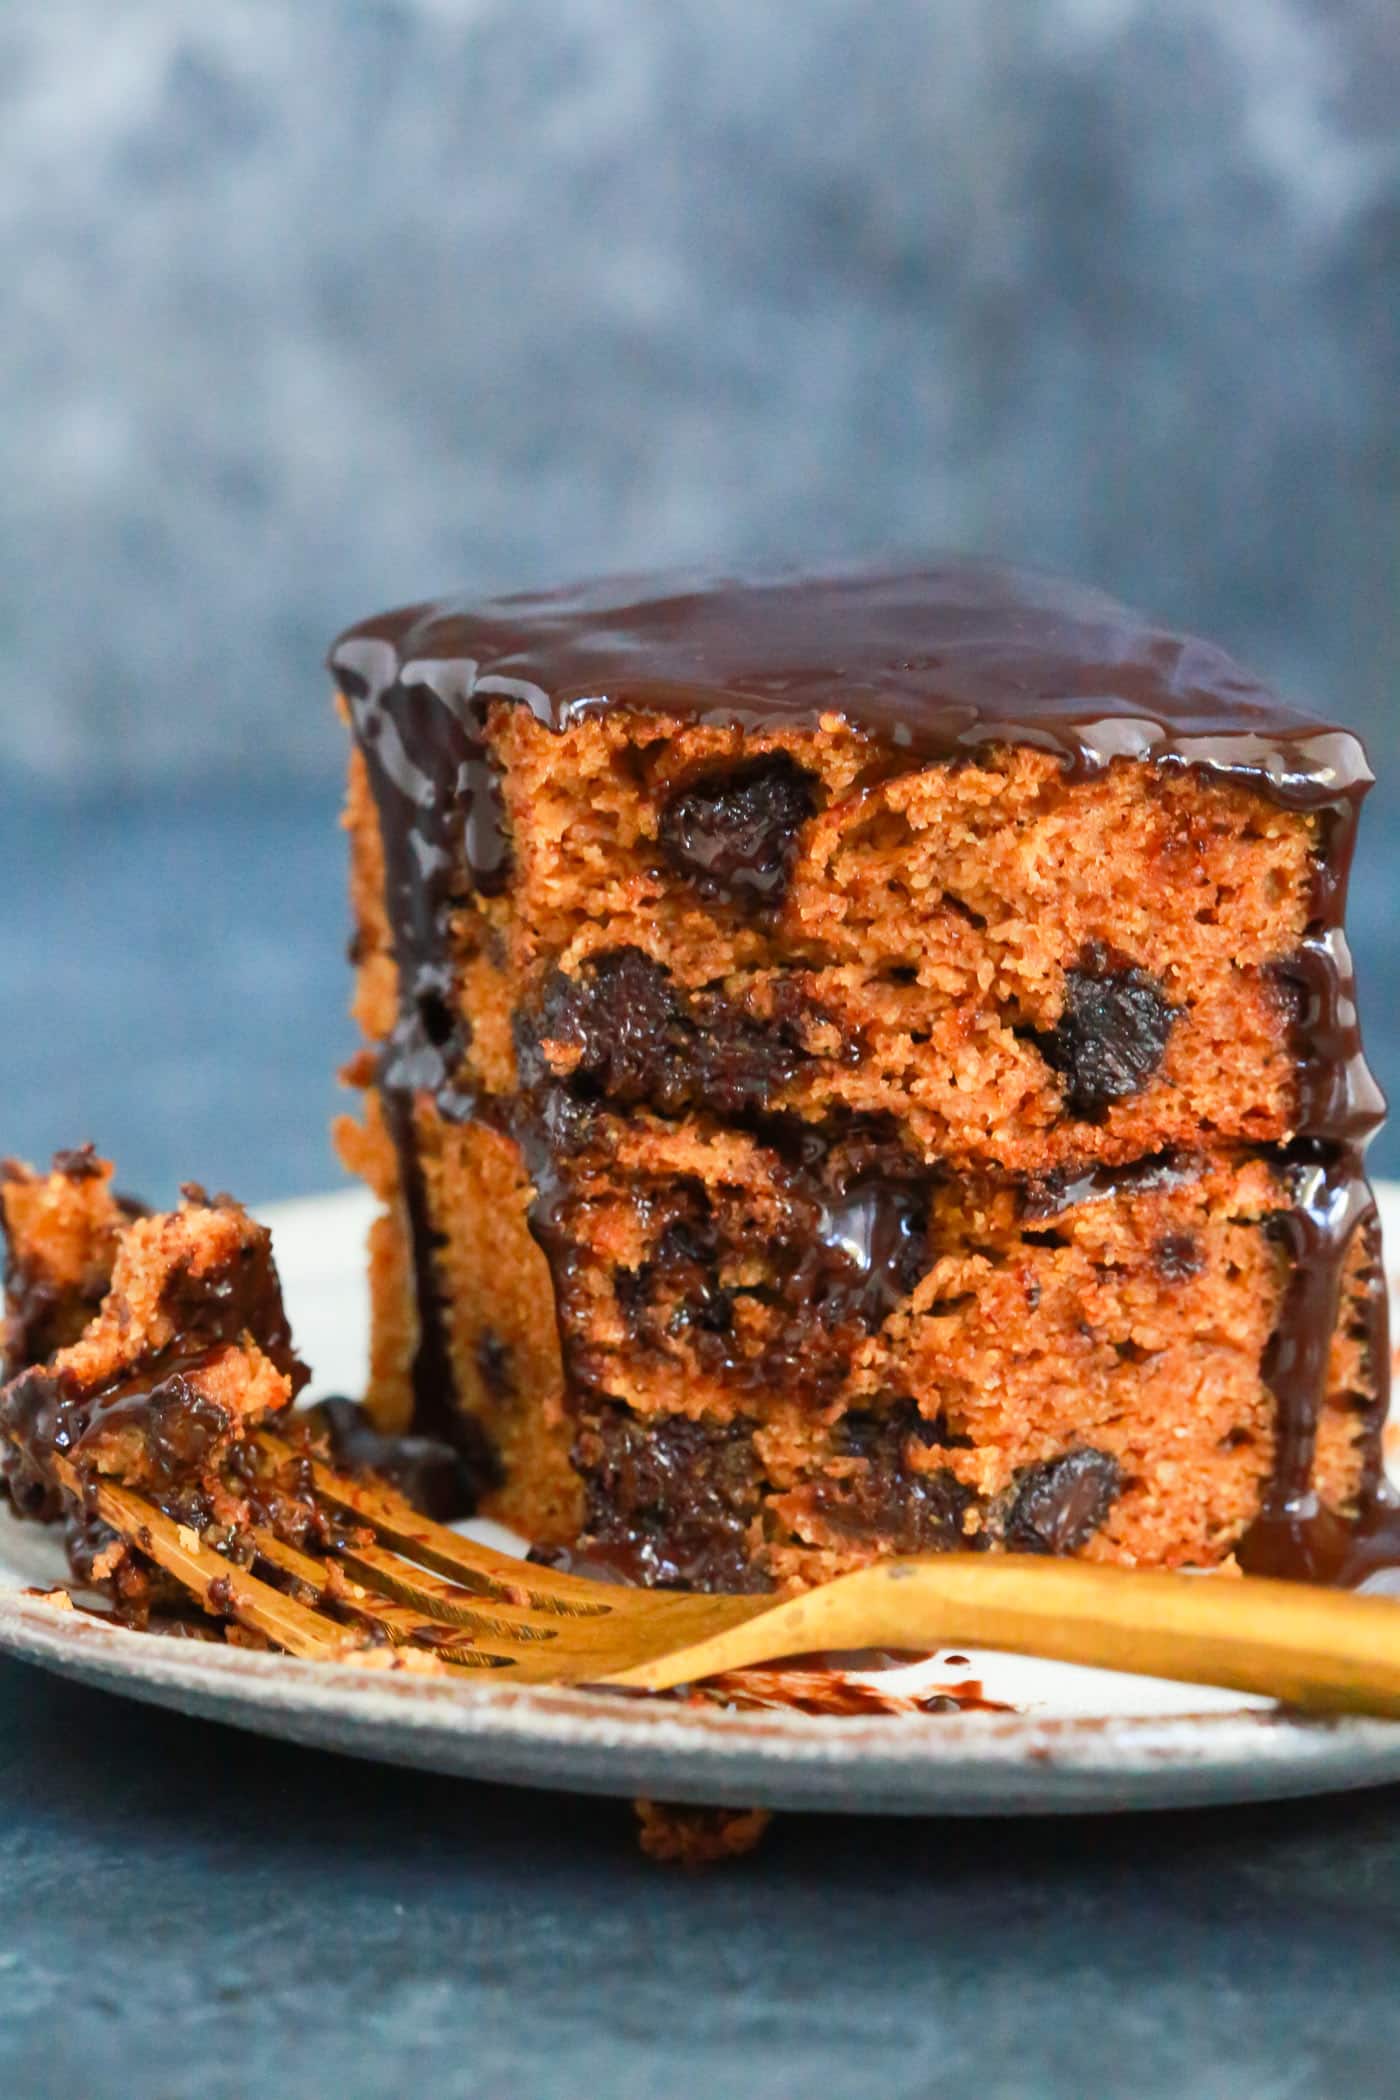  You’ll never believe that this super moist and rich paleo chocolate pumpkin cake is actually healthy. It’s gluten-free and made with peanut butter, almond flour, pumpkin puree and coconut milk. 